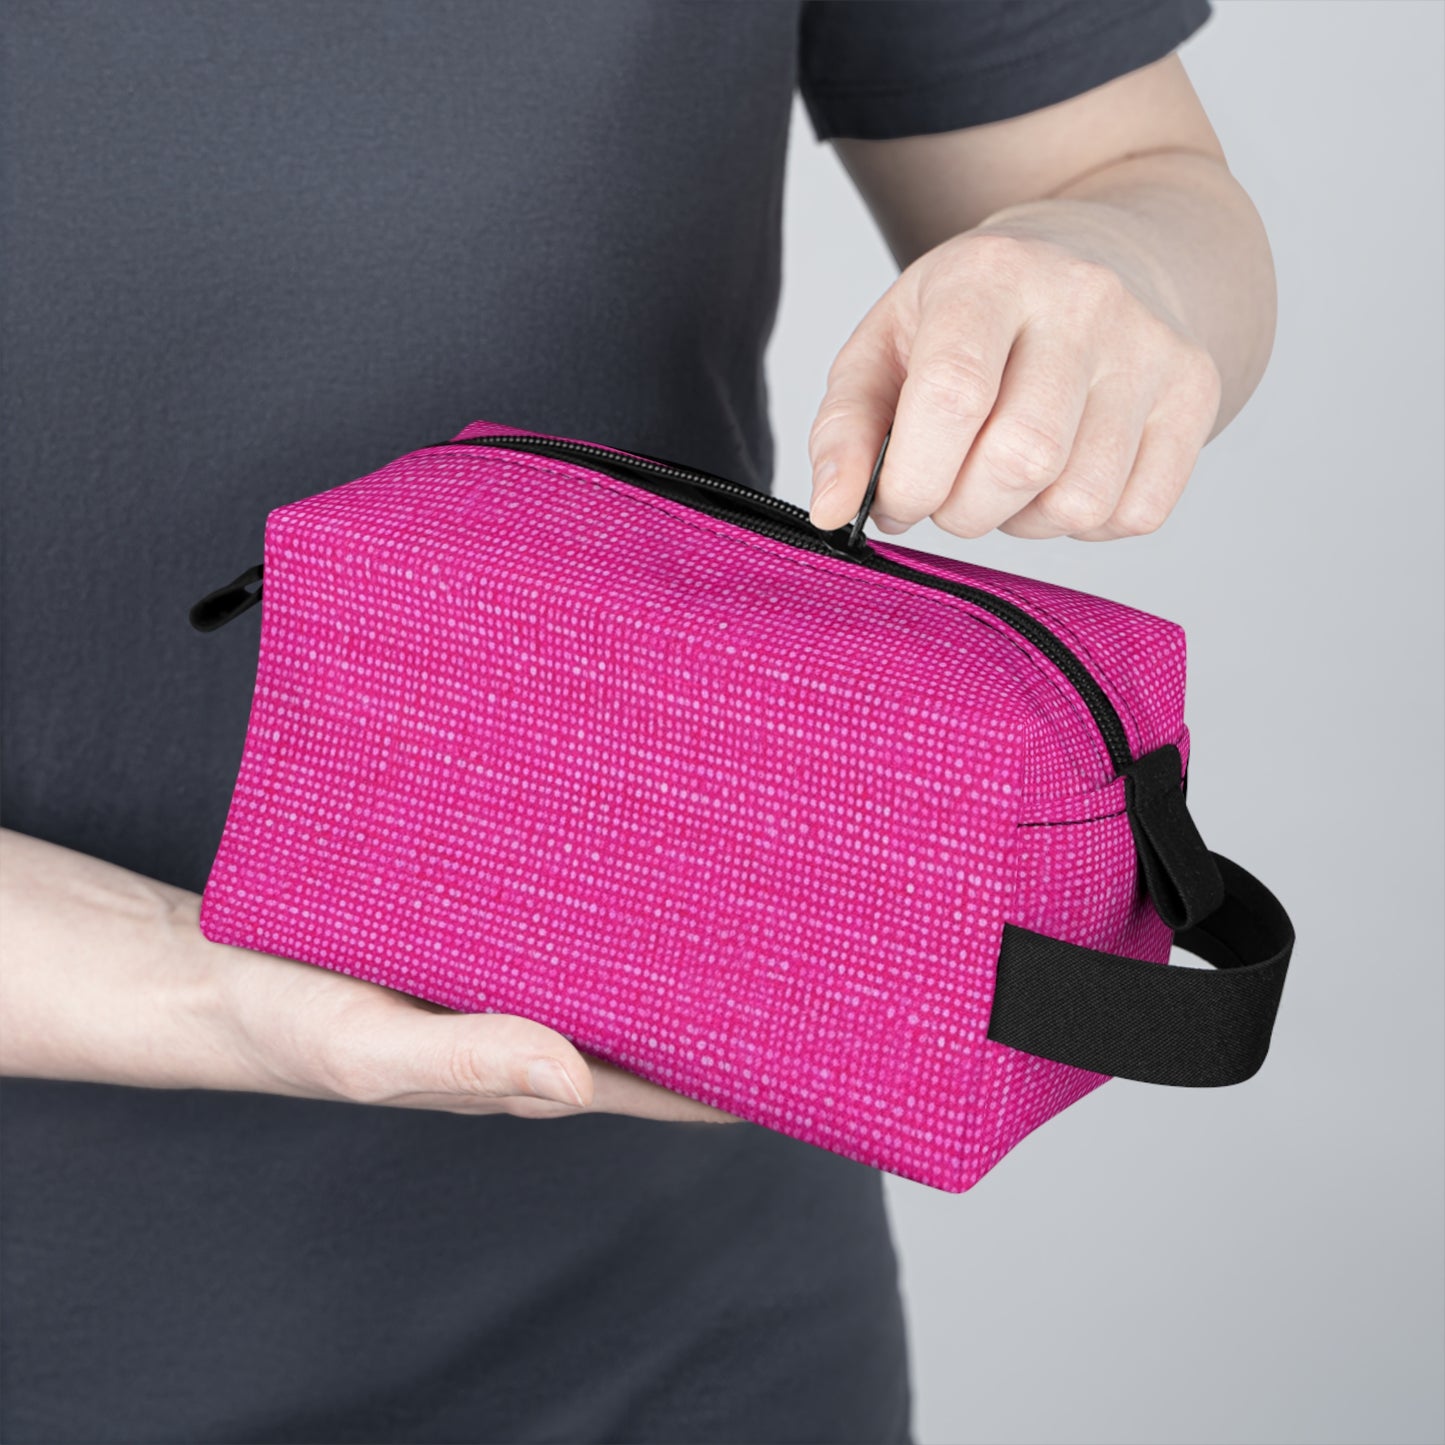 Hot Neon Pink Doll Like: Denim-Inspired, Bold & Bright Fabric - Toiletry Bag